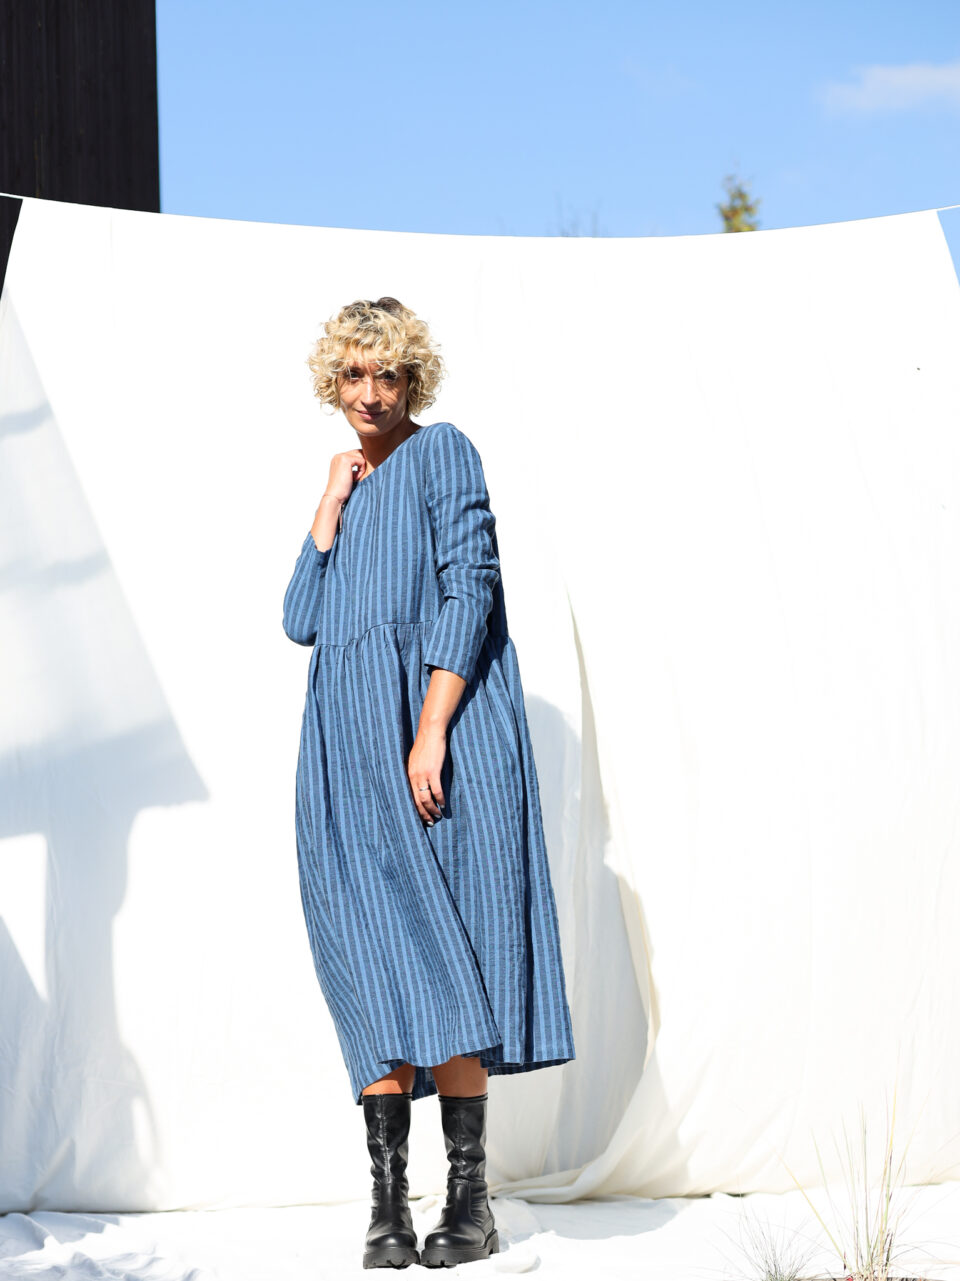 Striped linen loose fit smock dress MILANA | Dress | Sustainable clothing | OffOn clothing